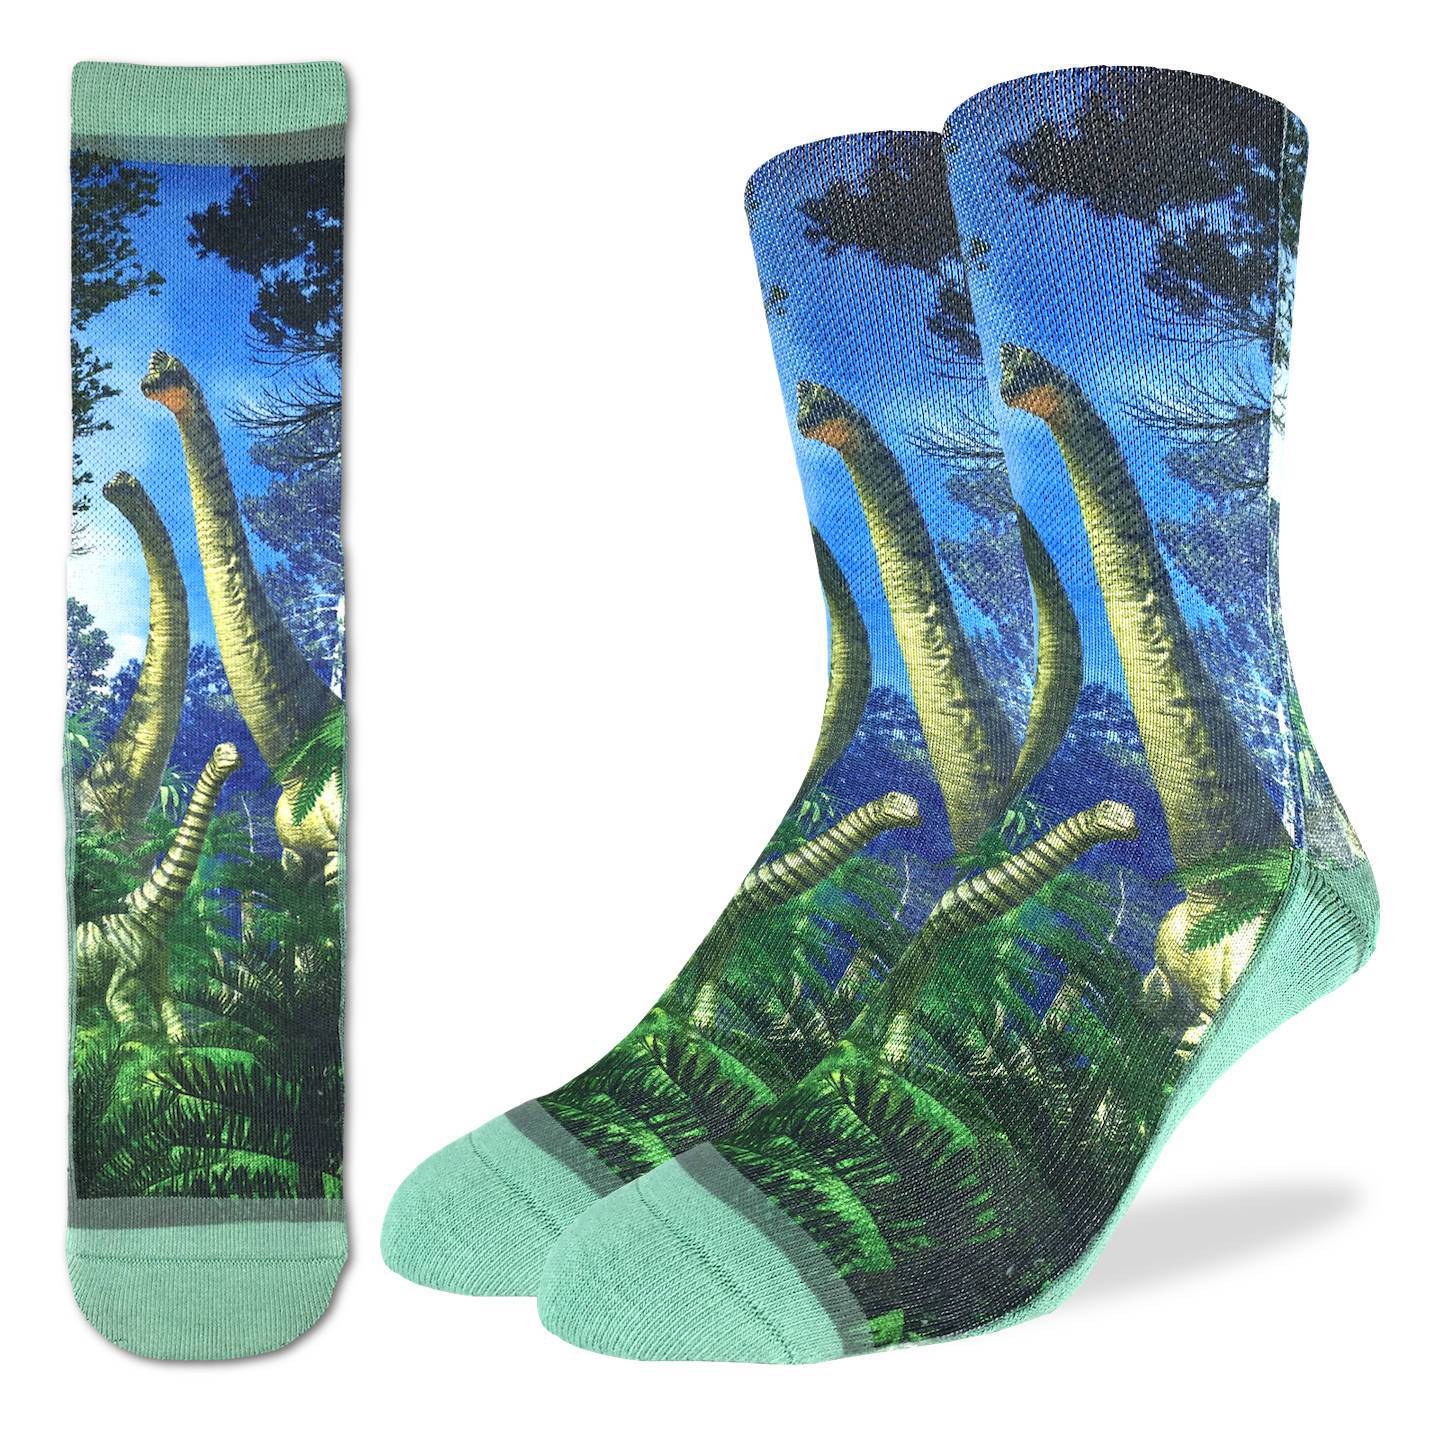 Sock, GL Active Fit "Dinos"